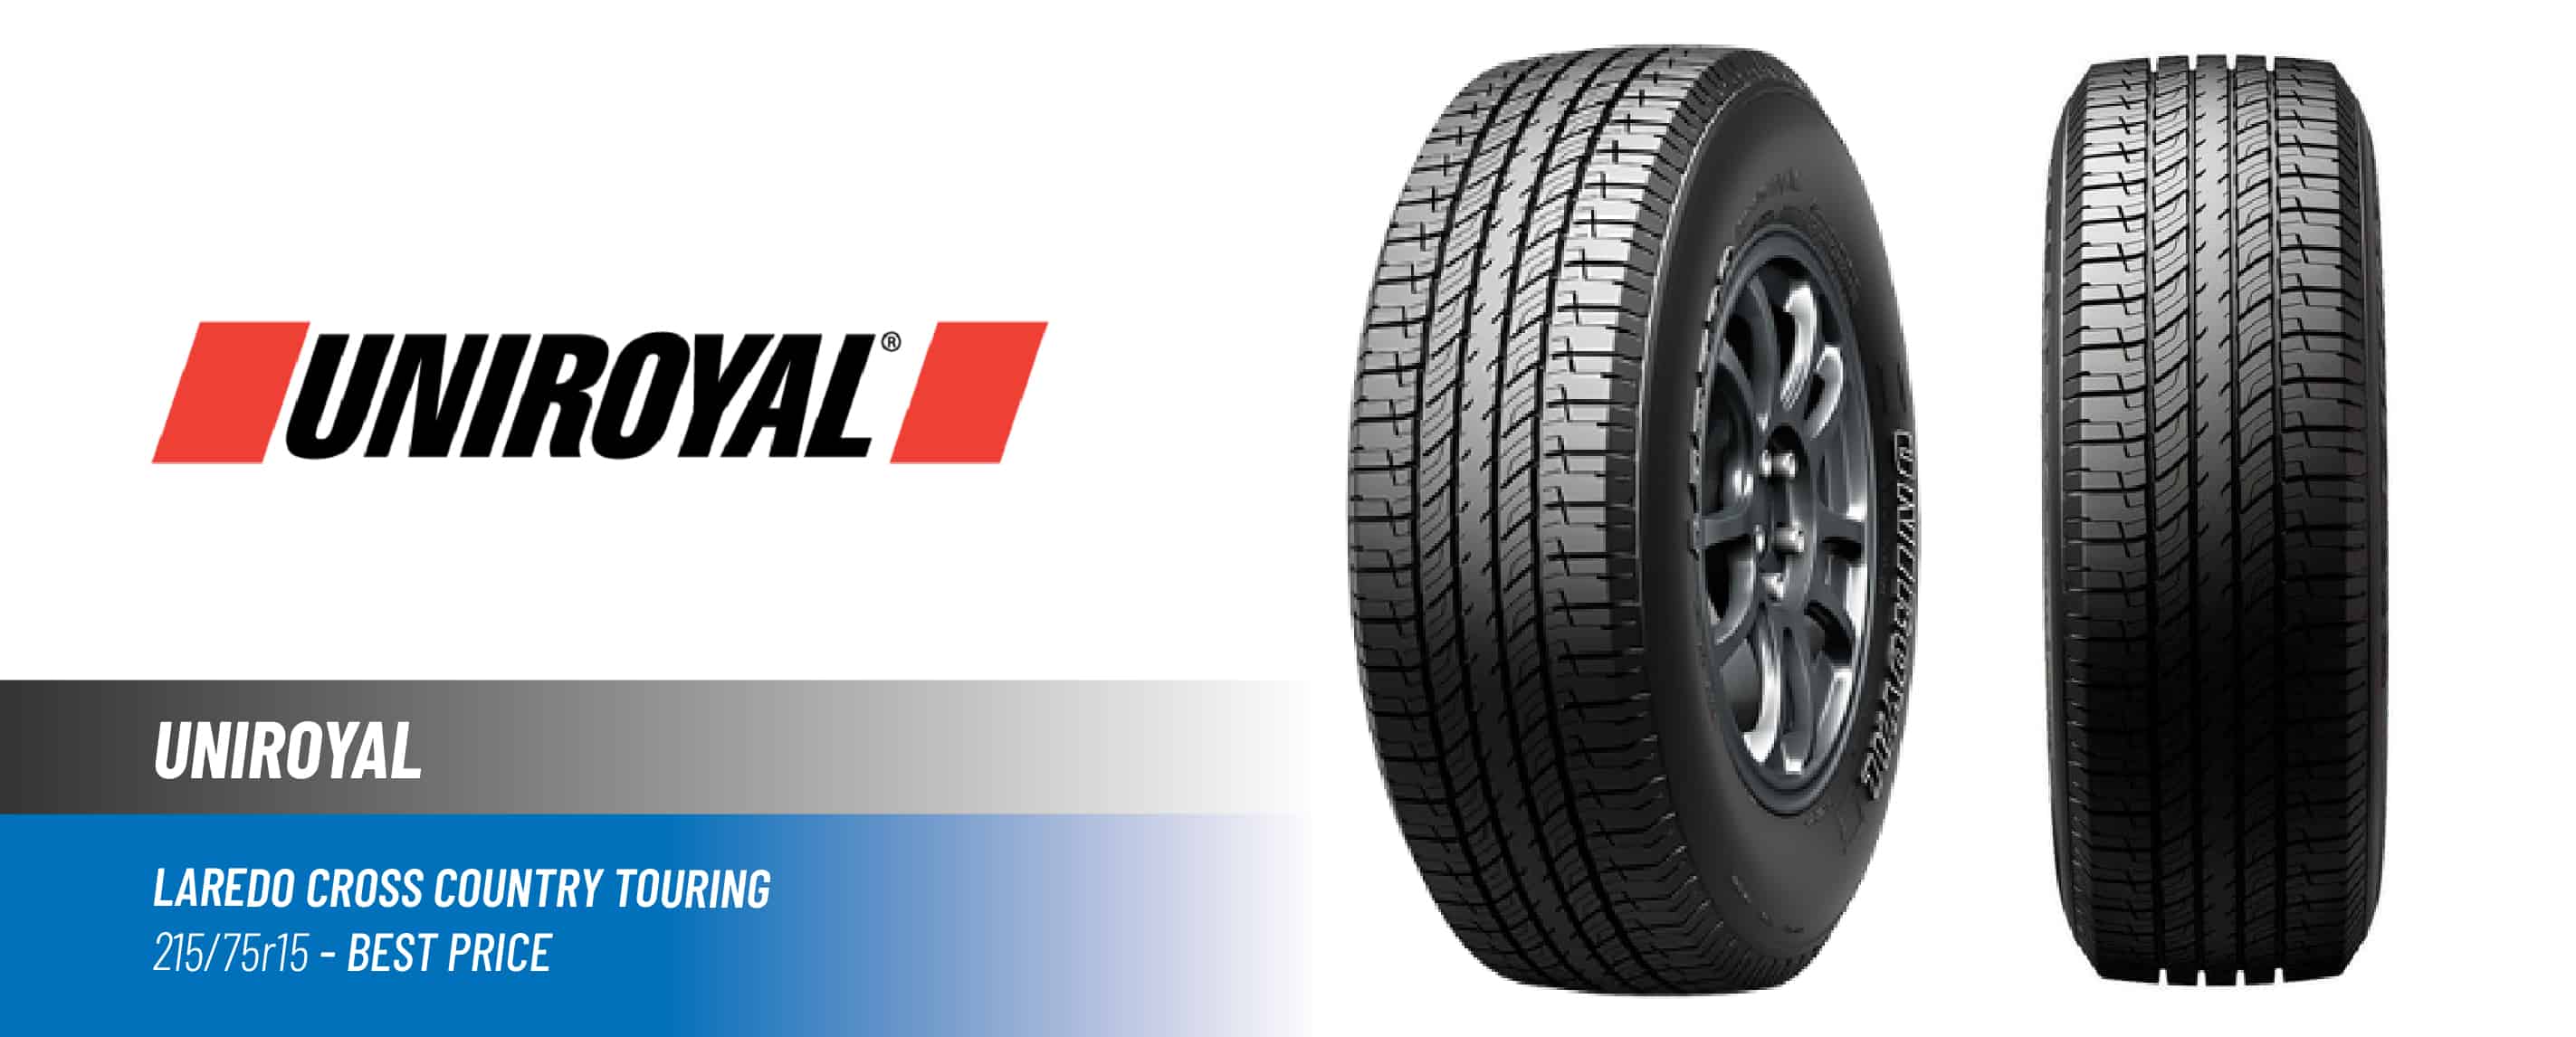 Top#4 Best Price: Uniroyal Laredo Cross Country Touring - best 215/75r15